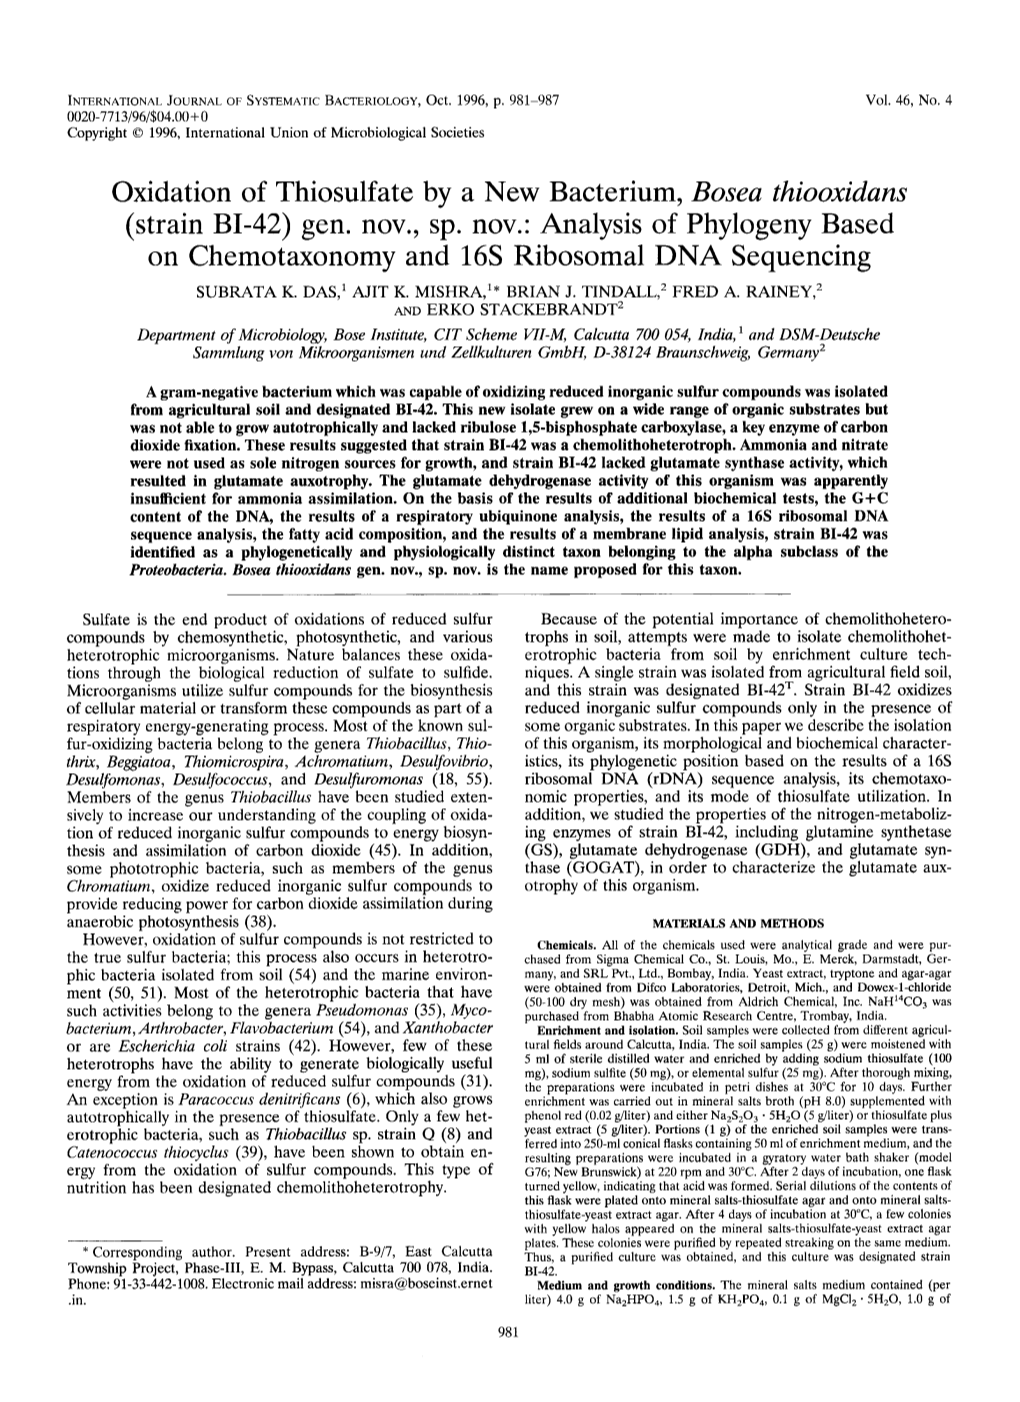 Oxidation of Thiosulfate by a New Bacterium, Bosea Thiooxidans (Strain BI-42) Gen